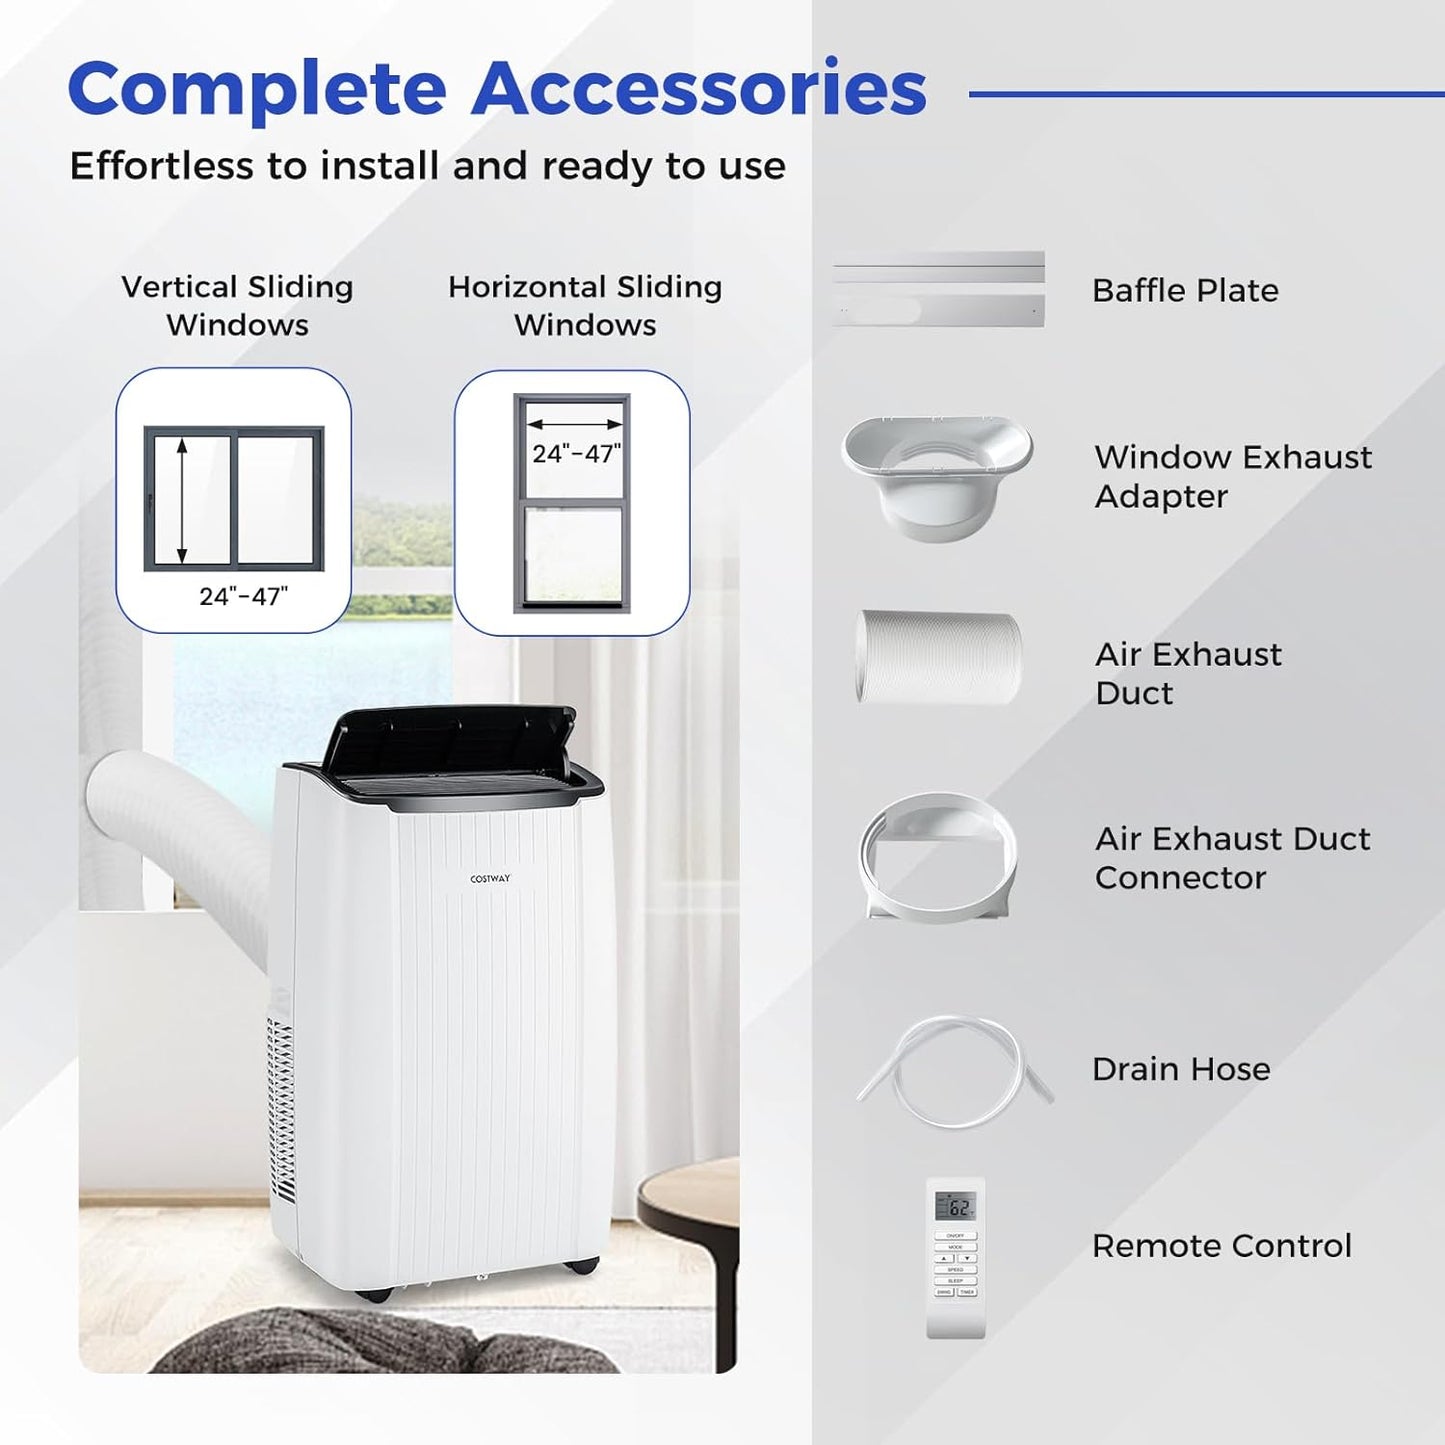 14000BTU Portable Air Conditioner with Heat, Smart Wifi Enabled AC Unit, Fan & Dehumidifier W/ 24H Timer, Sleep Mode, Remote Control & Installation Kit, Cool Rooms up to 700 Sq.Ft